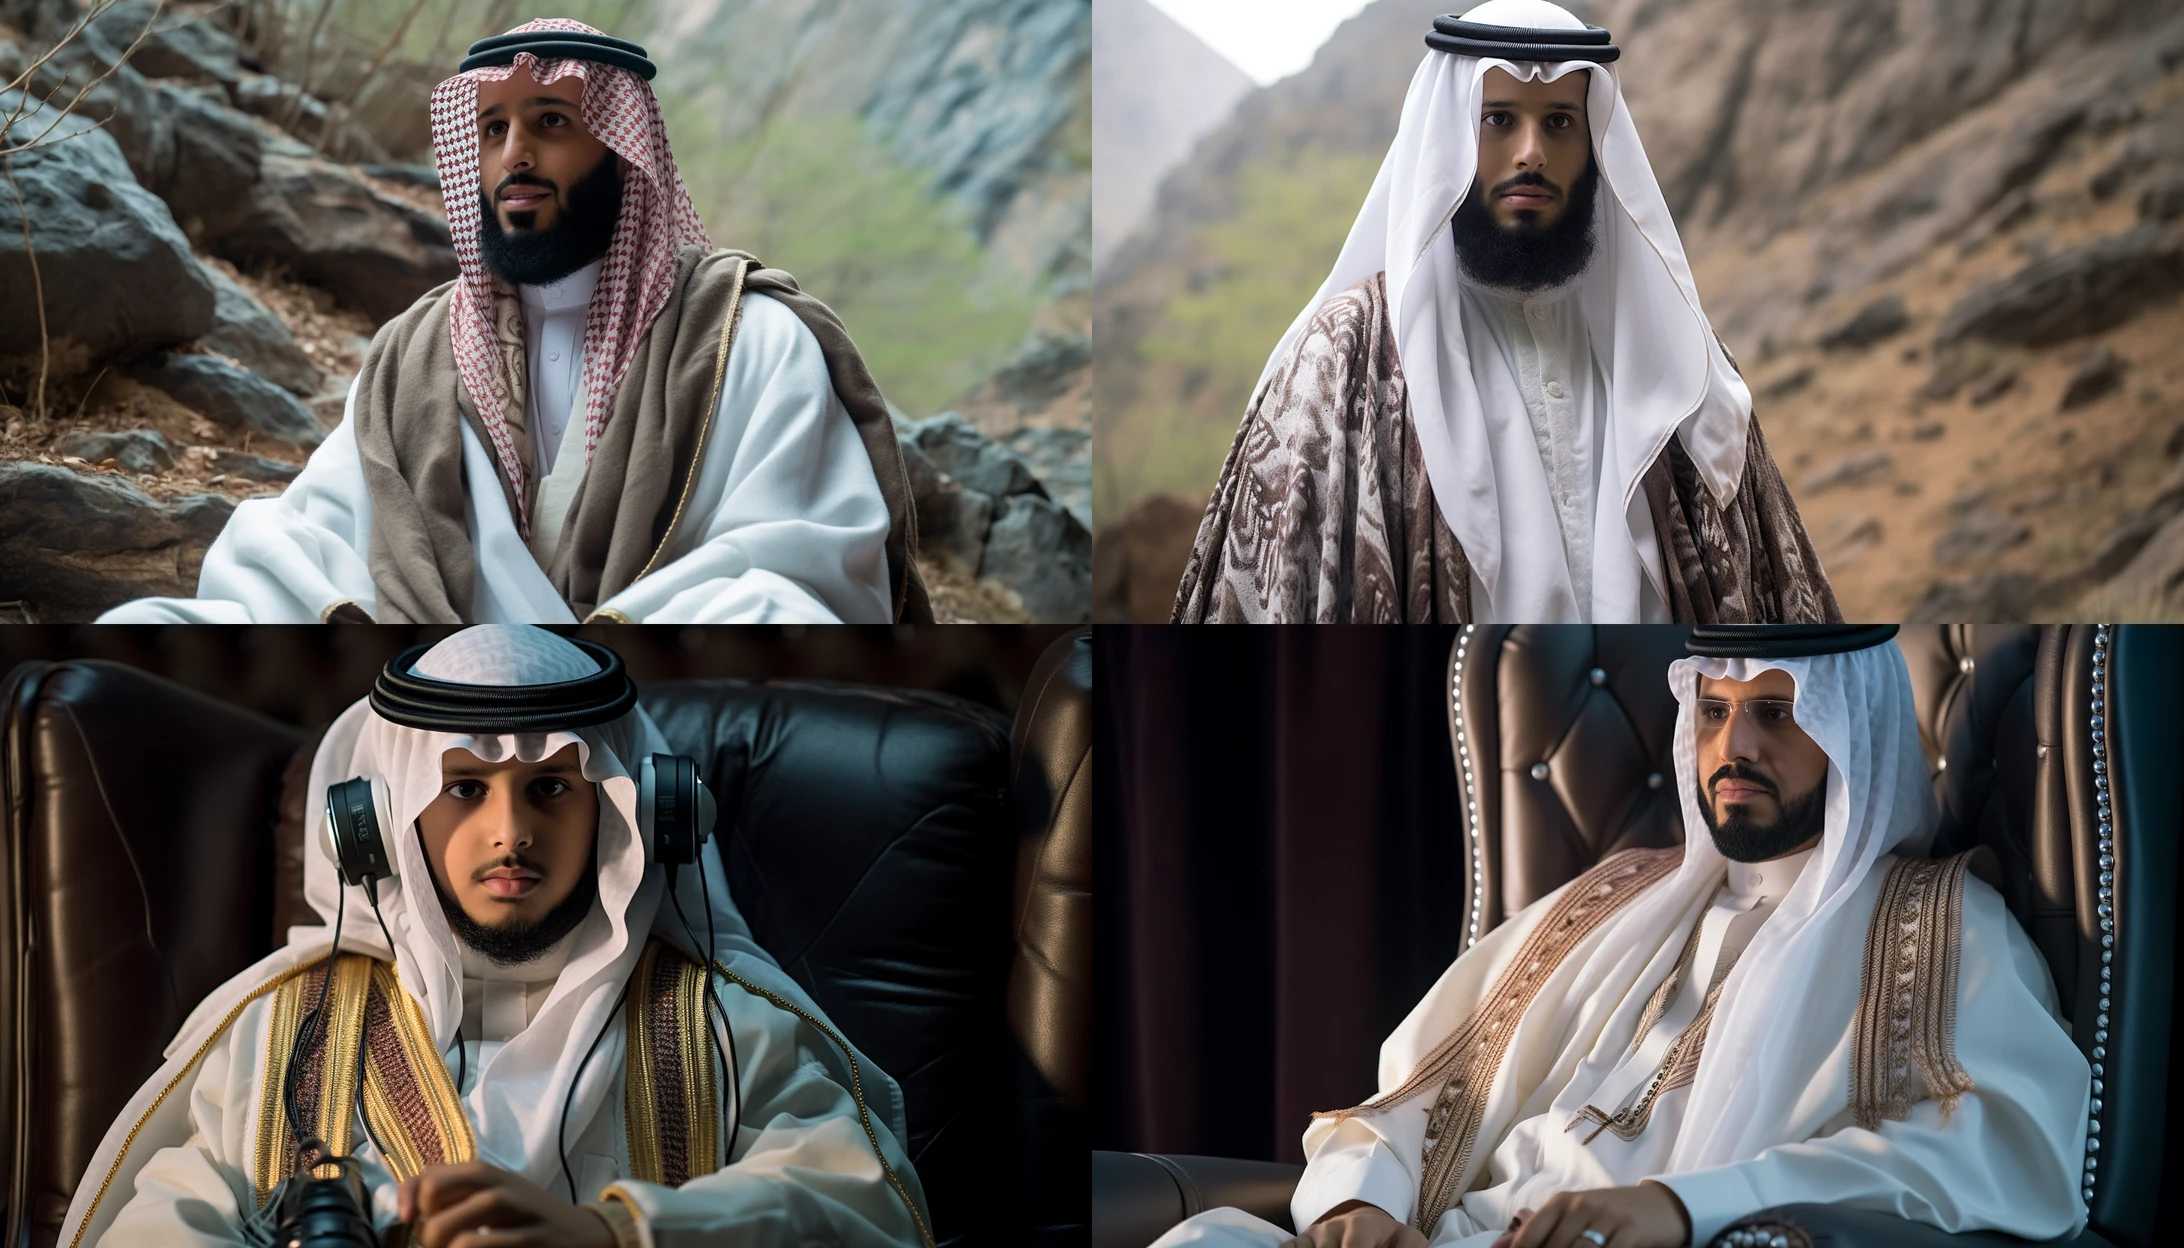 Saudi Arabia's Crown Prince Mohammed bin Salman discussing peace negotiations in an exclusive interview, photographed with a Sony A7 III.